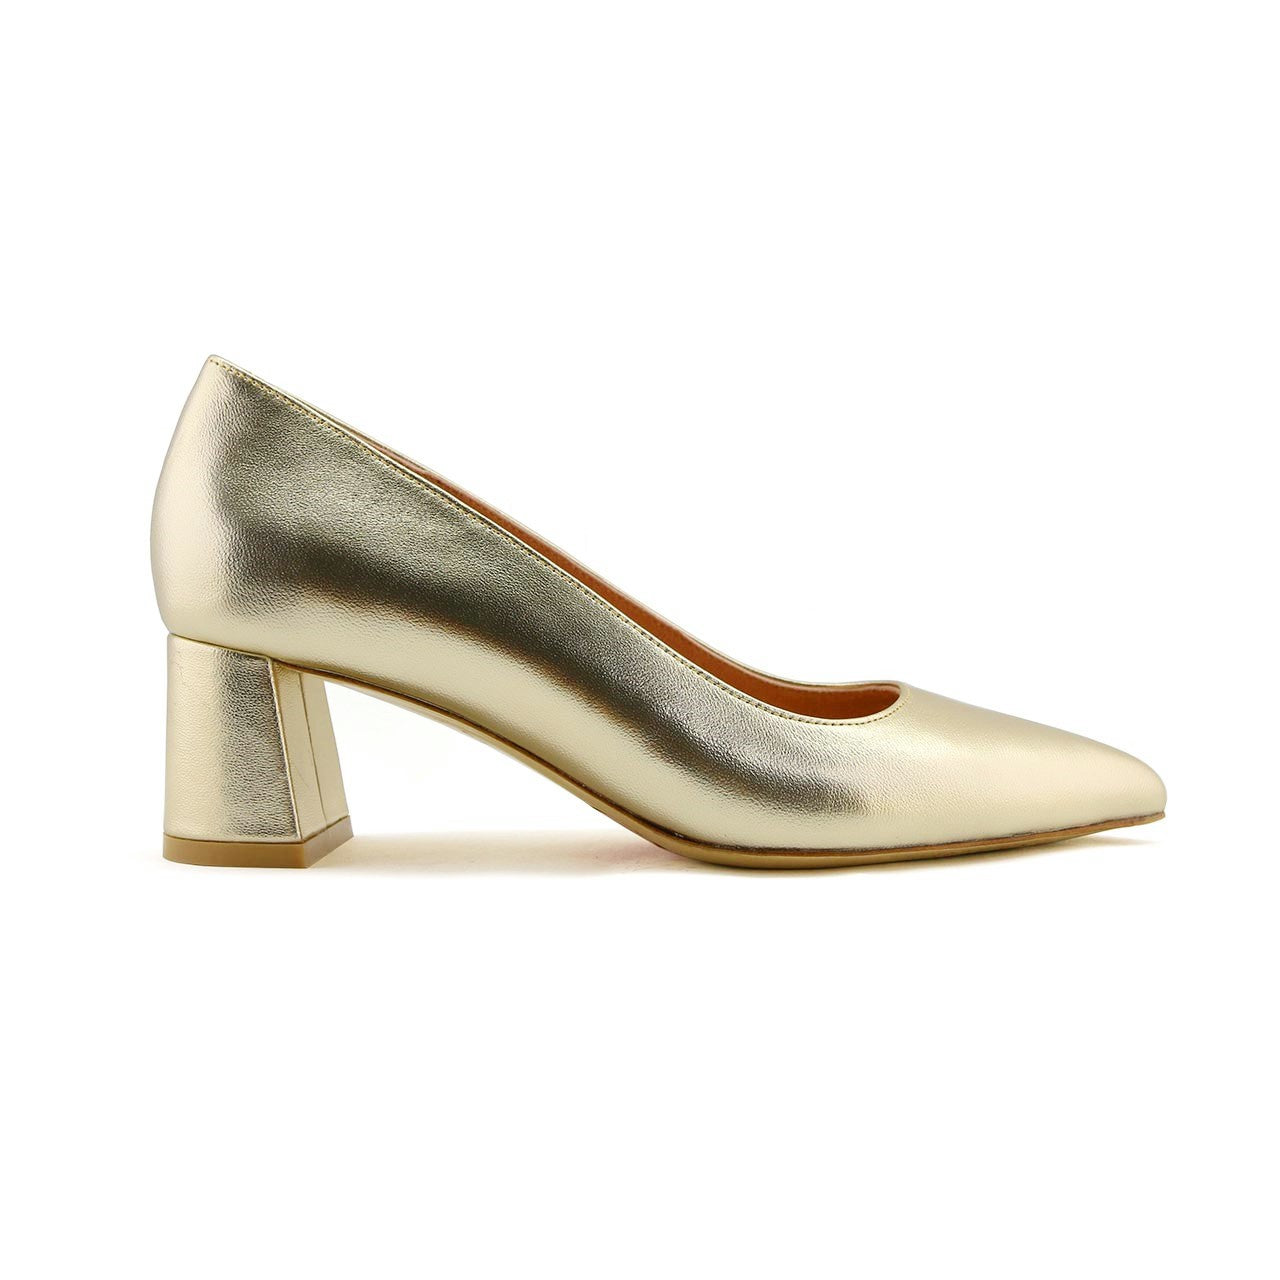 Dune London heeled court shoes in gold glitter | ASOS